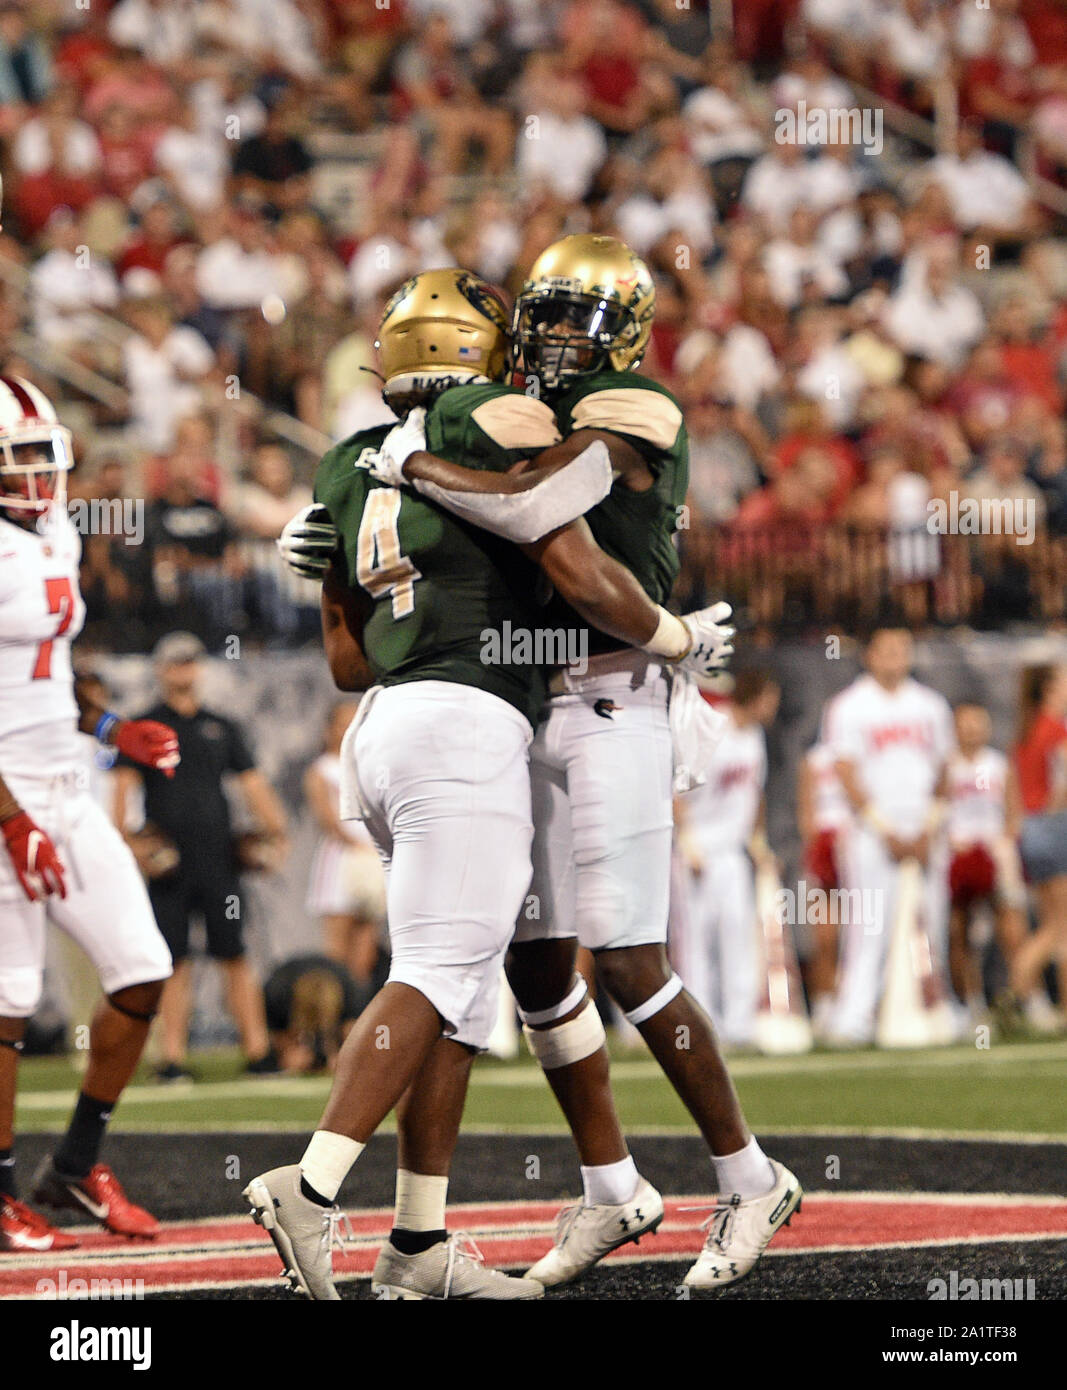 September 28, 2019: UAB Blazers running back Spencer Brown (4) celebrates with UAB Blazers wide receiver Austin Watkins (6) during a NCAA football game between the UAB Blazers and the WKU Hilltoppers at Houchens Industries-LT Smith Stadium (Photo Credit: Steve Roberts.CSM) Stock Photo